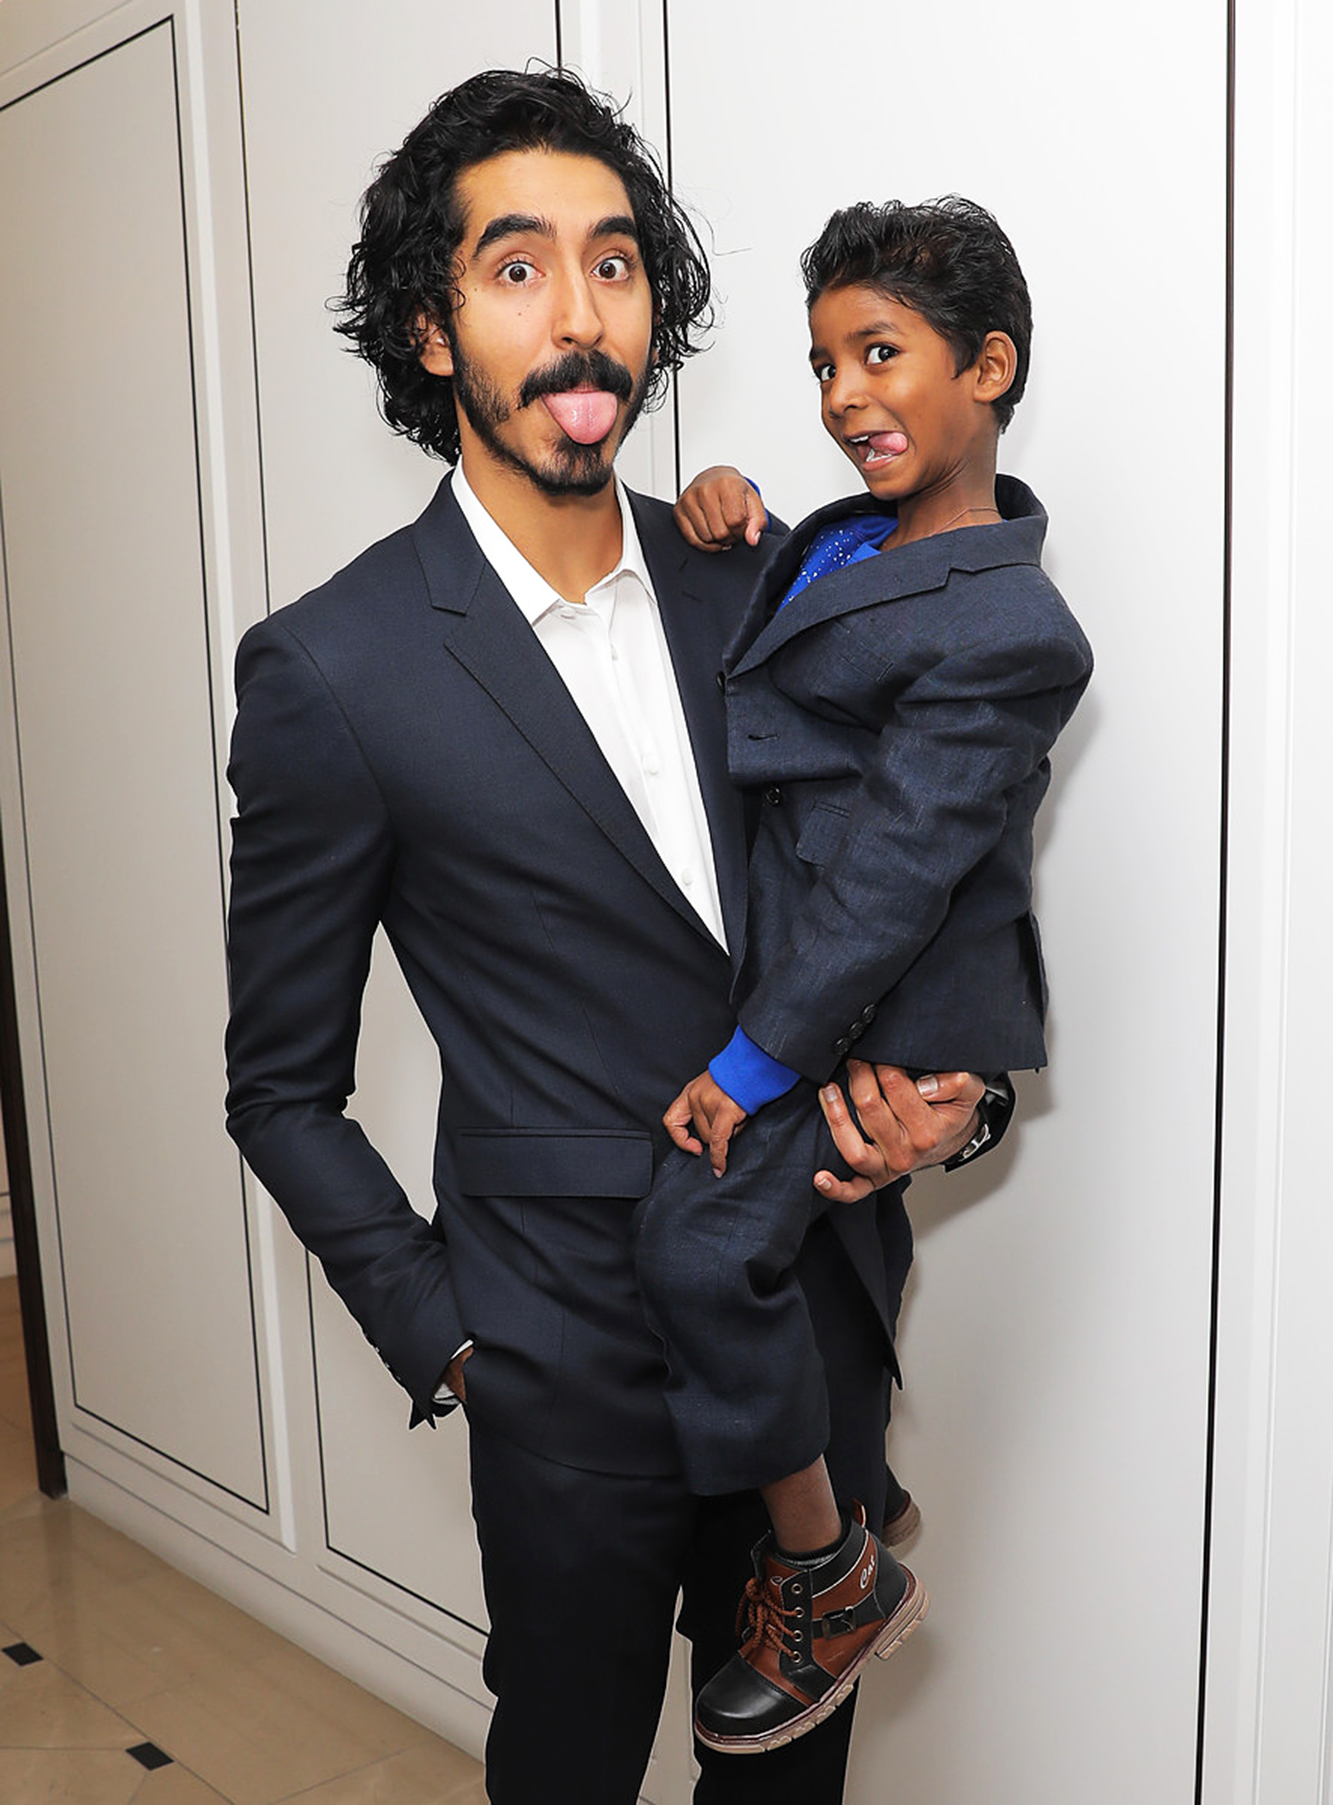 Dev Patel and Sunny Pawar at "Burberry and The Weinstein Company honor Dev Patel," in Los Angeles, on Nov. 30, 2016.